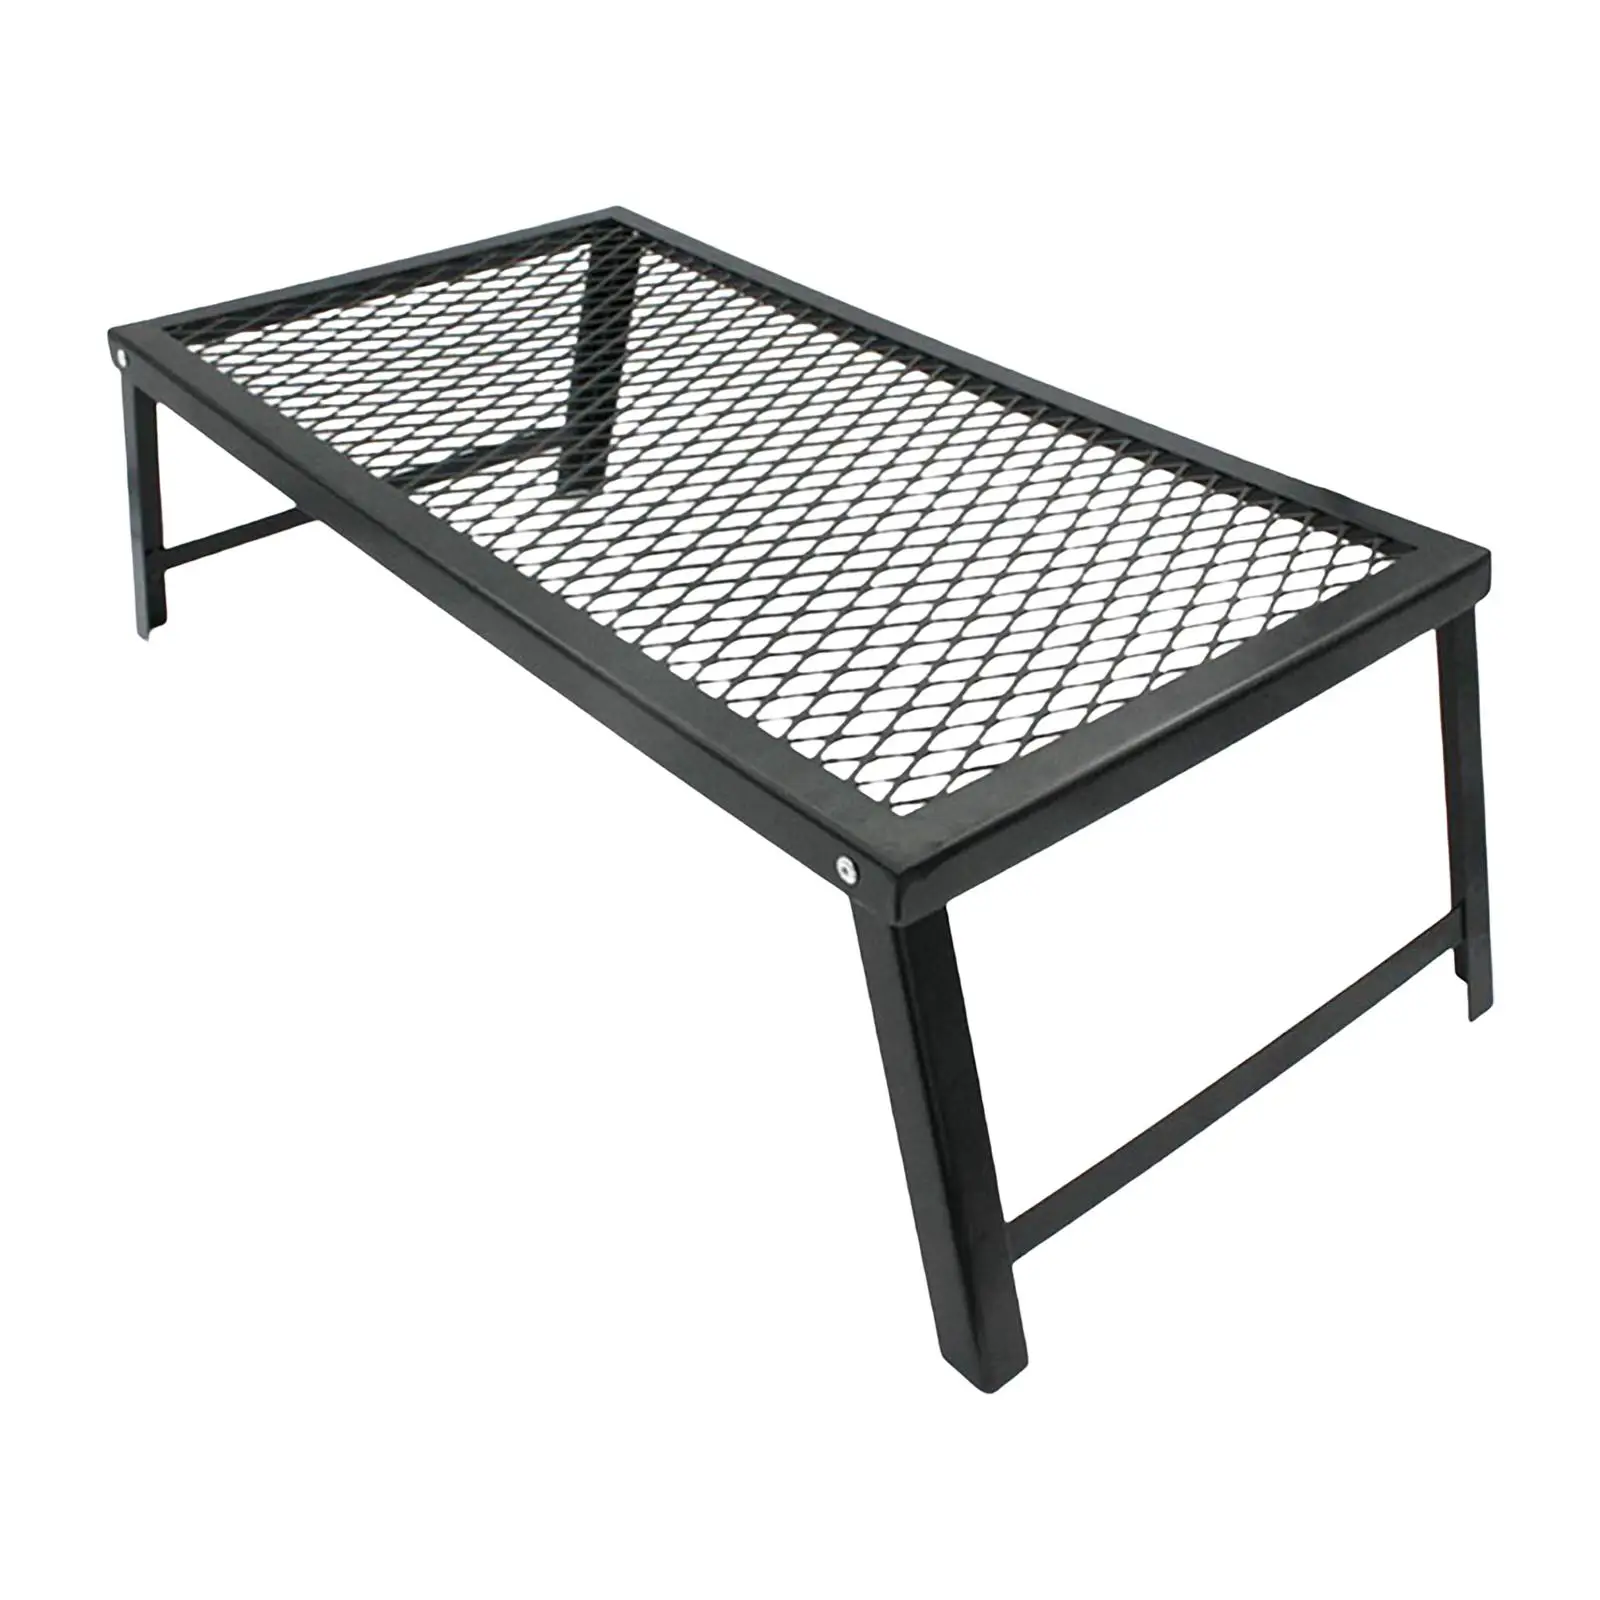 Multifunctional Barbecue Net Desk Camp Grill Rack with Foldable Legs Folding Mesh Table for Fishing Camping Backyard Travel BBQ